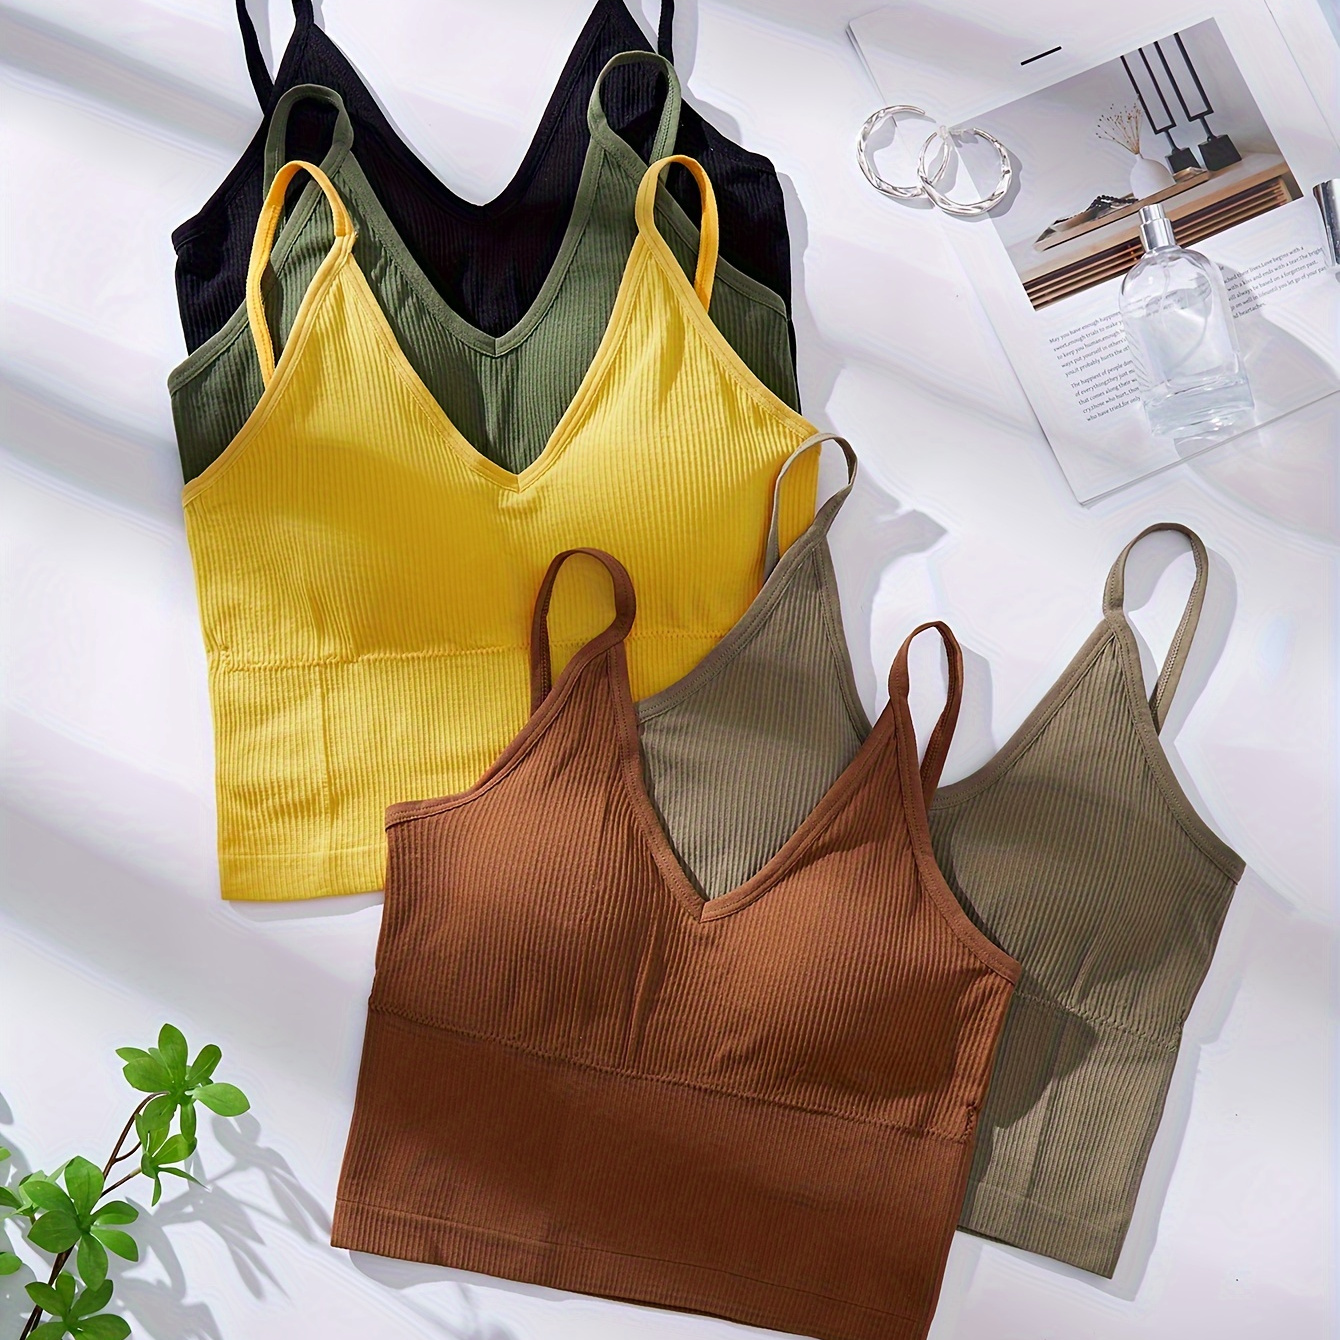 

5pcs Women's Casual Bralette Tank Tops - Solid Color, Knit Fabric, Machine Washable, Seamless, For Teens